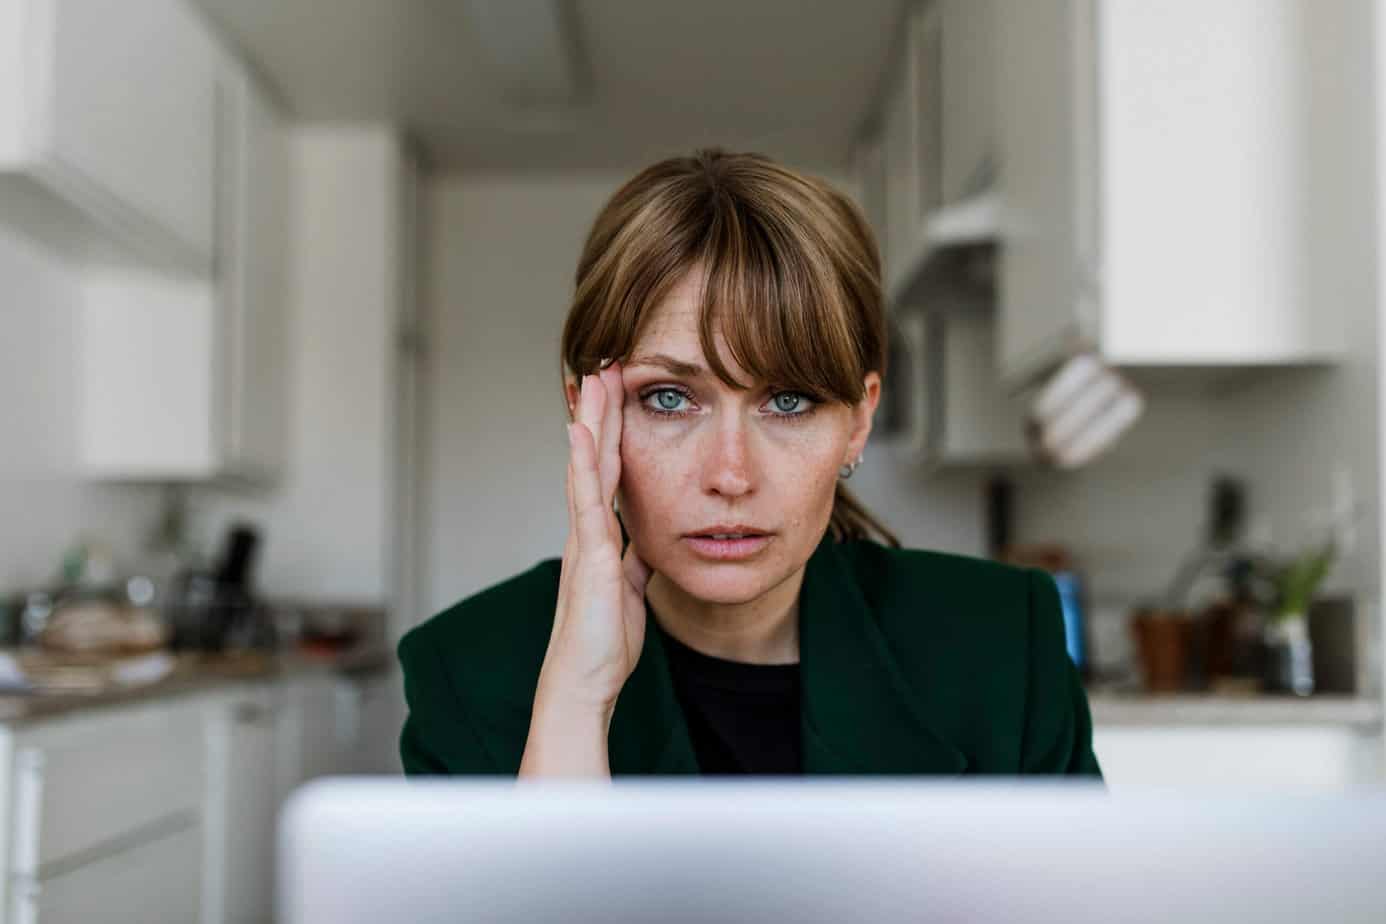 Stressed out woman working at home during coronavirus pandemic